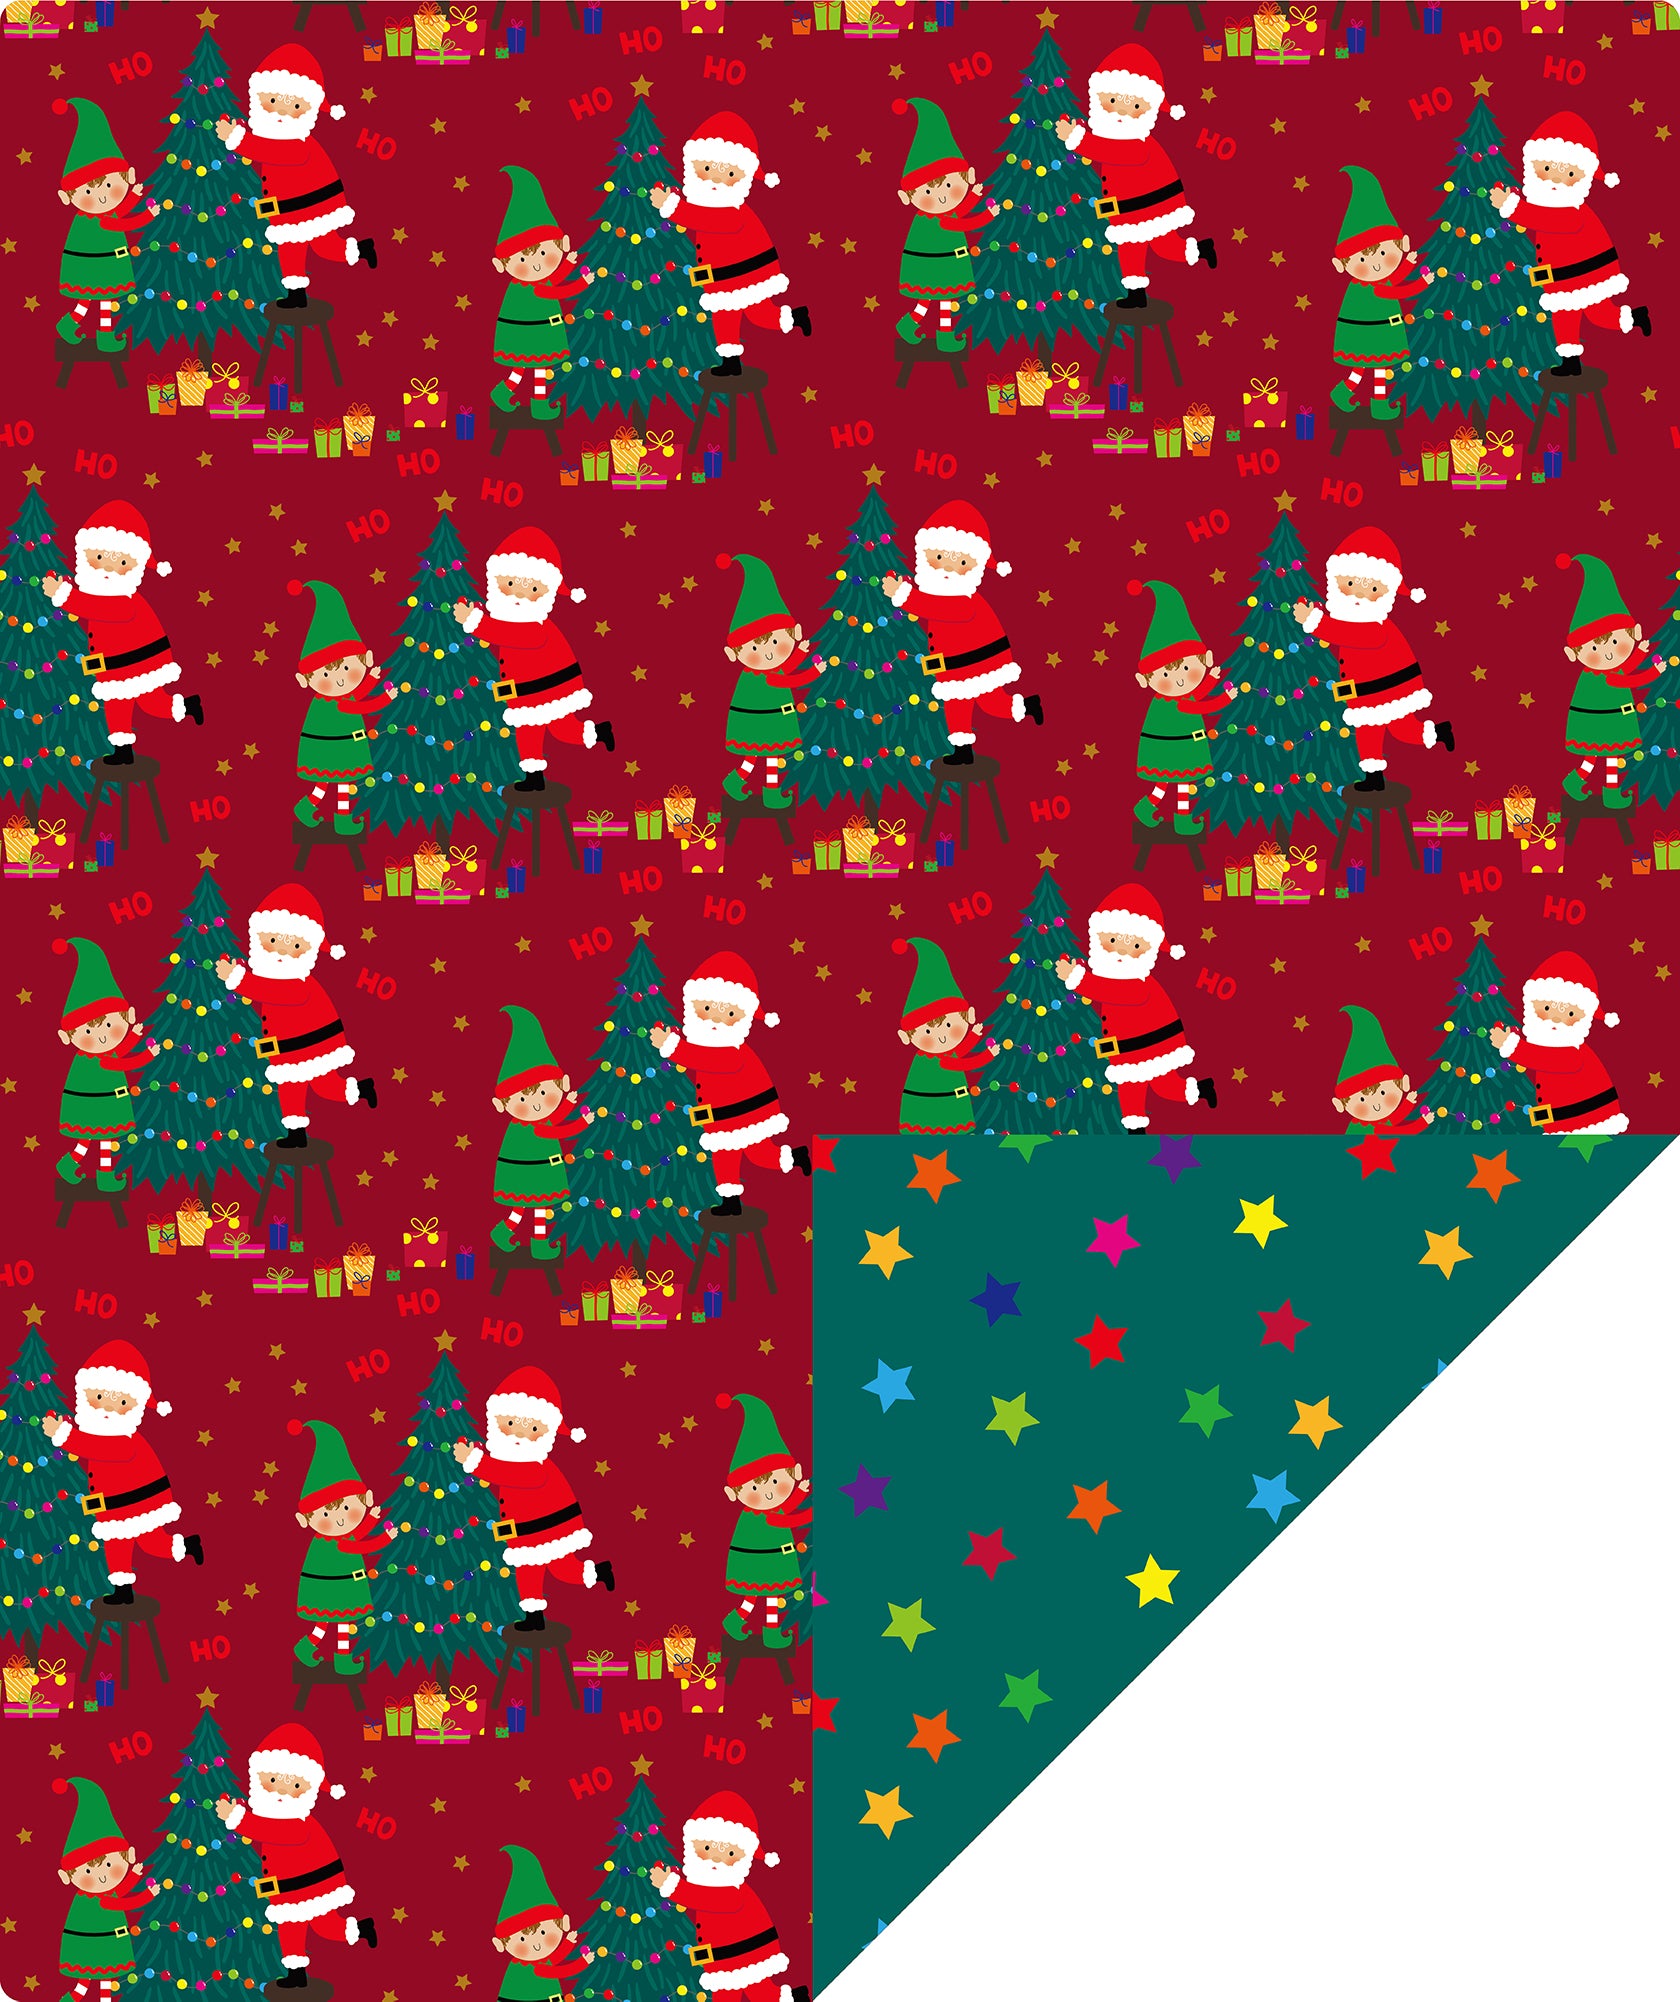 Snowscape Wrapping Paper Roll with Gray Christmas Tree on Reverse Wholesale Wrapholic